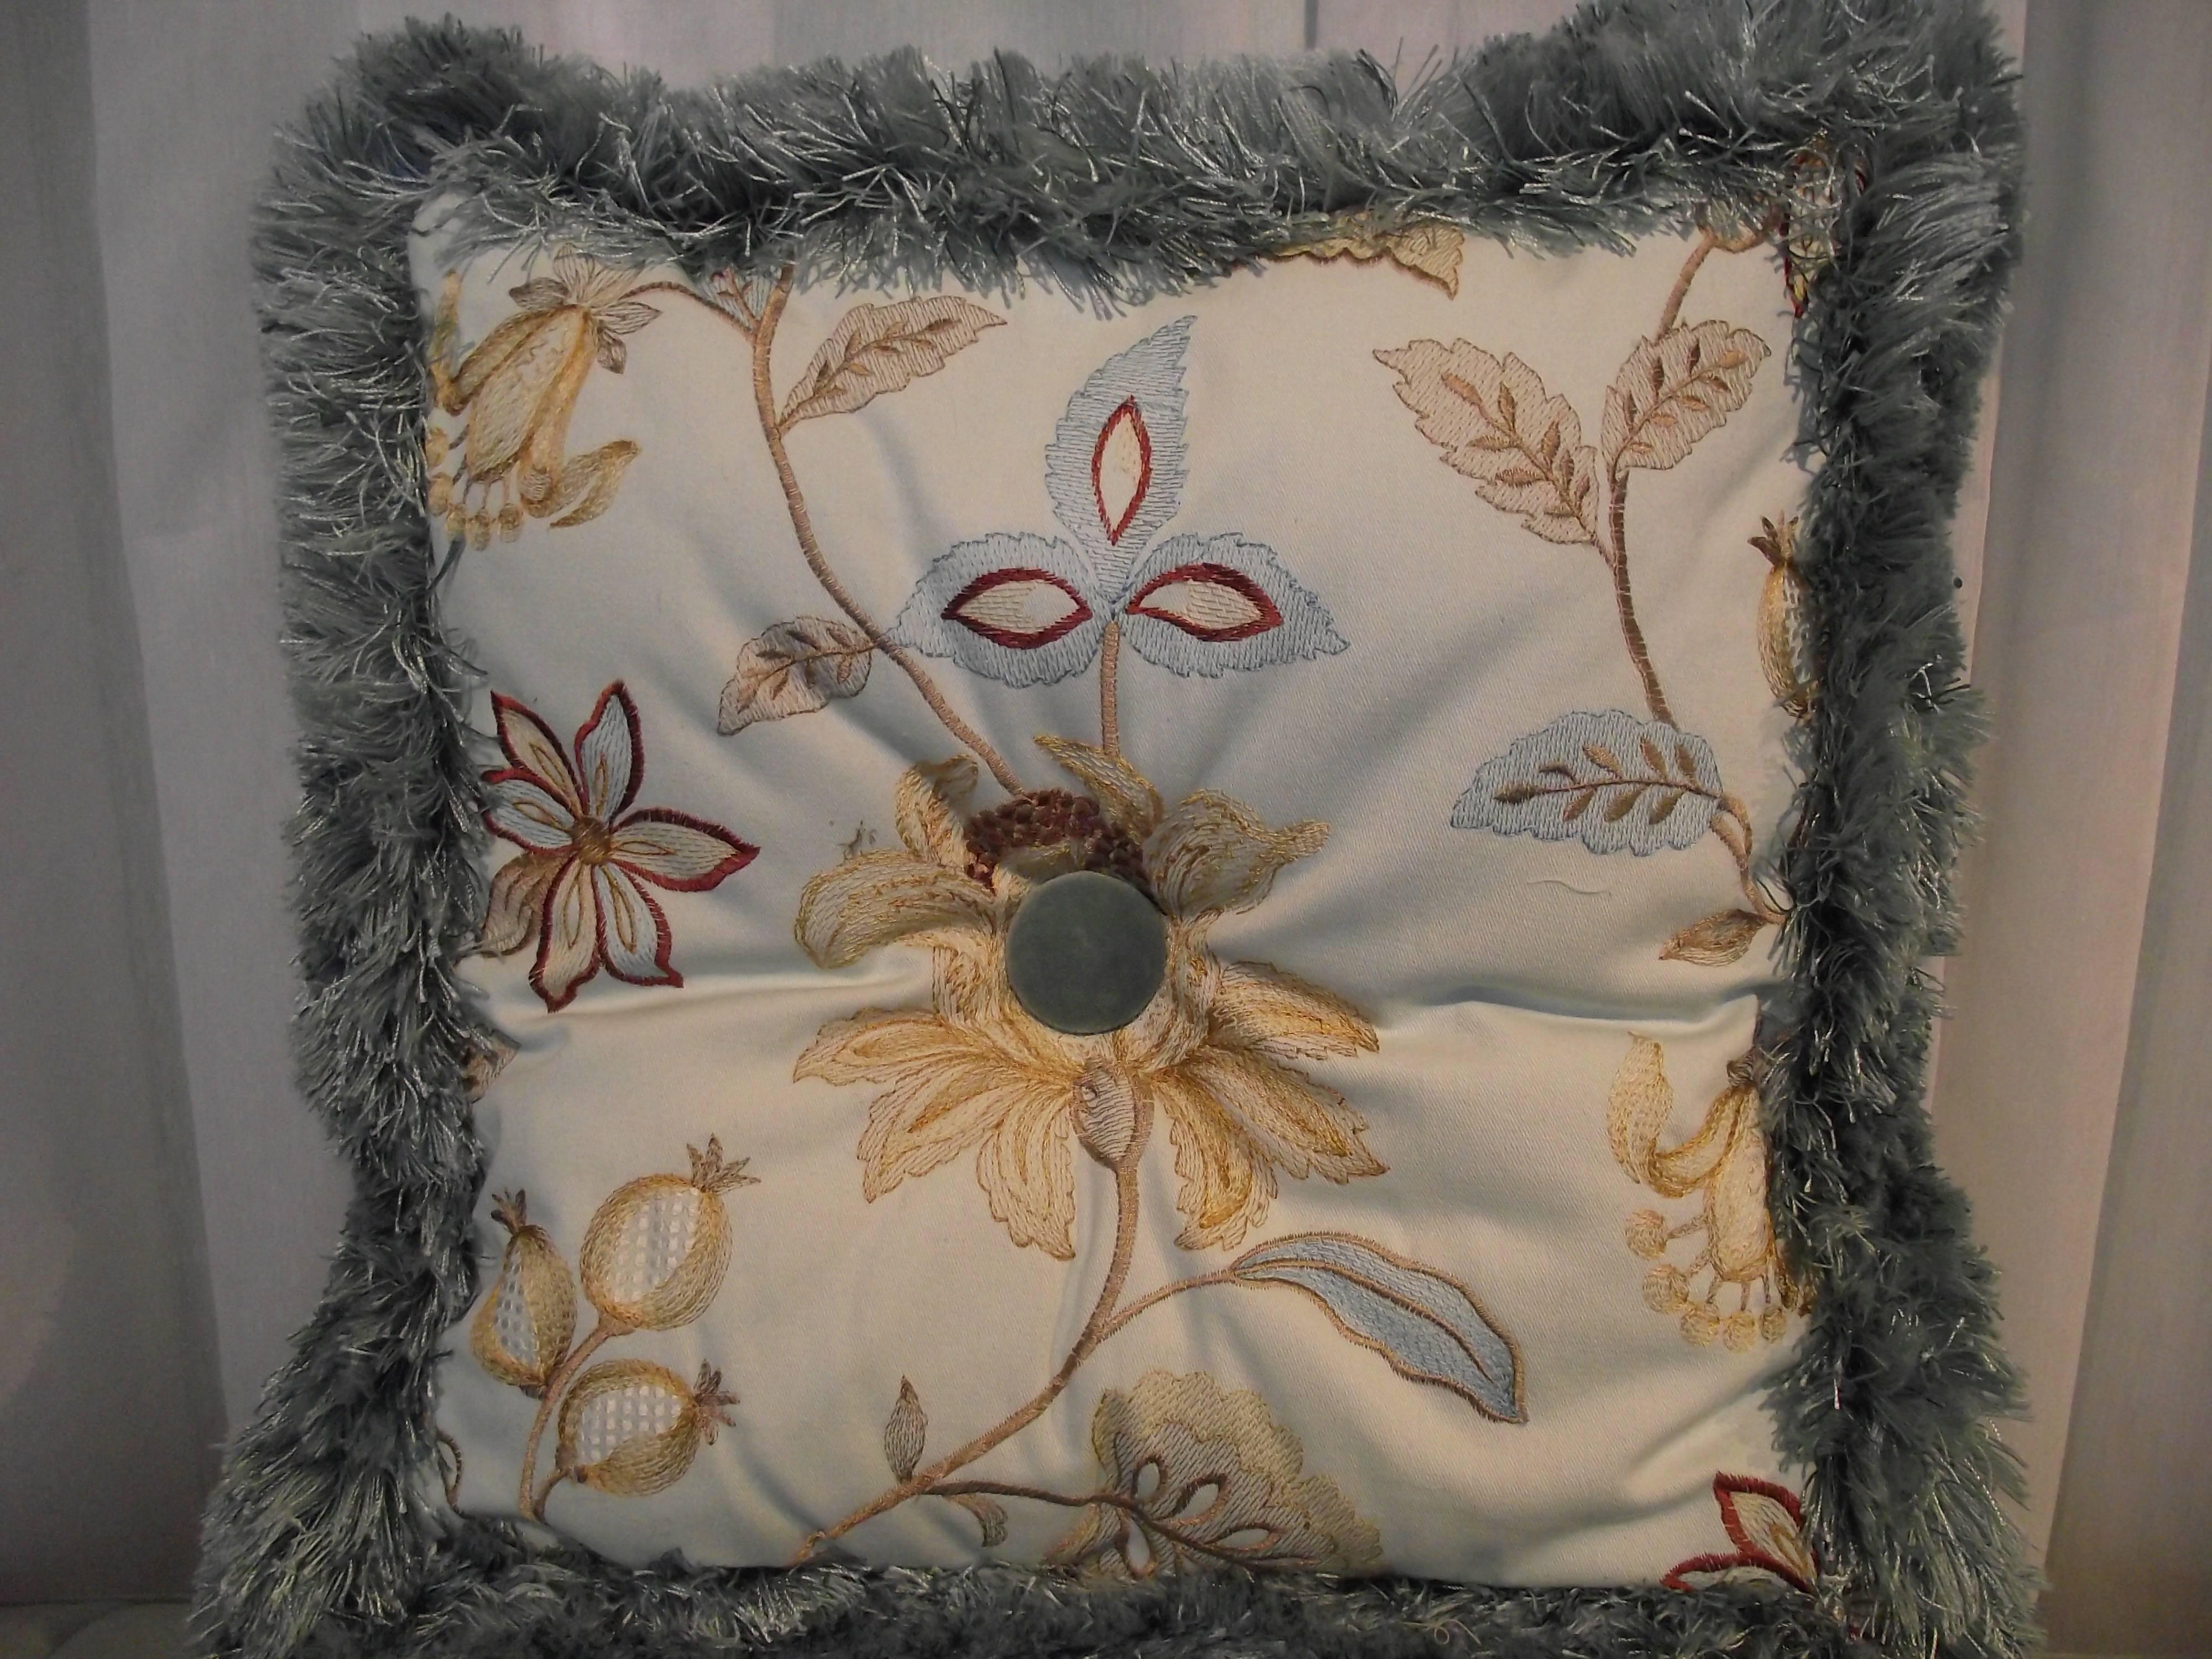 I have been mitering "patterns” for years now. It was an original idea of mine and I am not aware of anyone else doing it.

These unusual pillows feature an embroidered , mitered floral pattern on the front and
an overall embroidered design